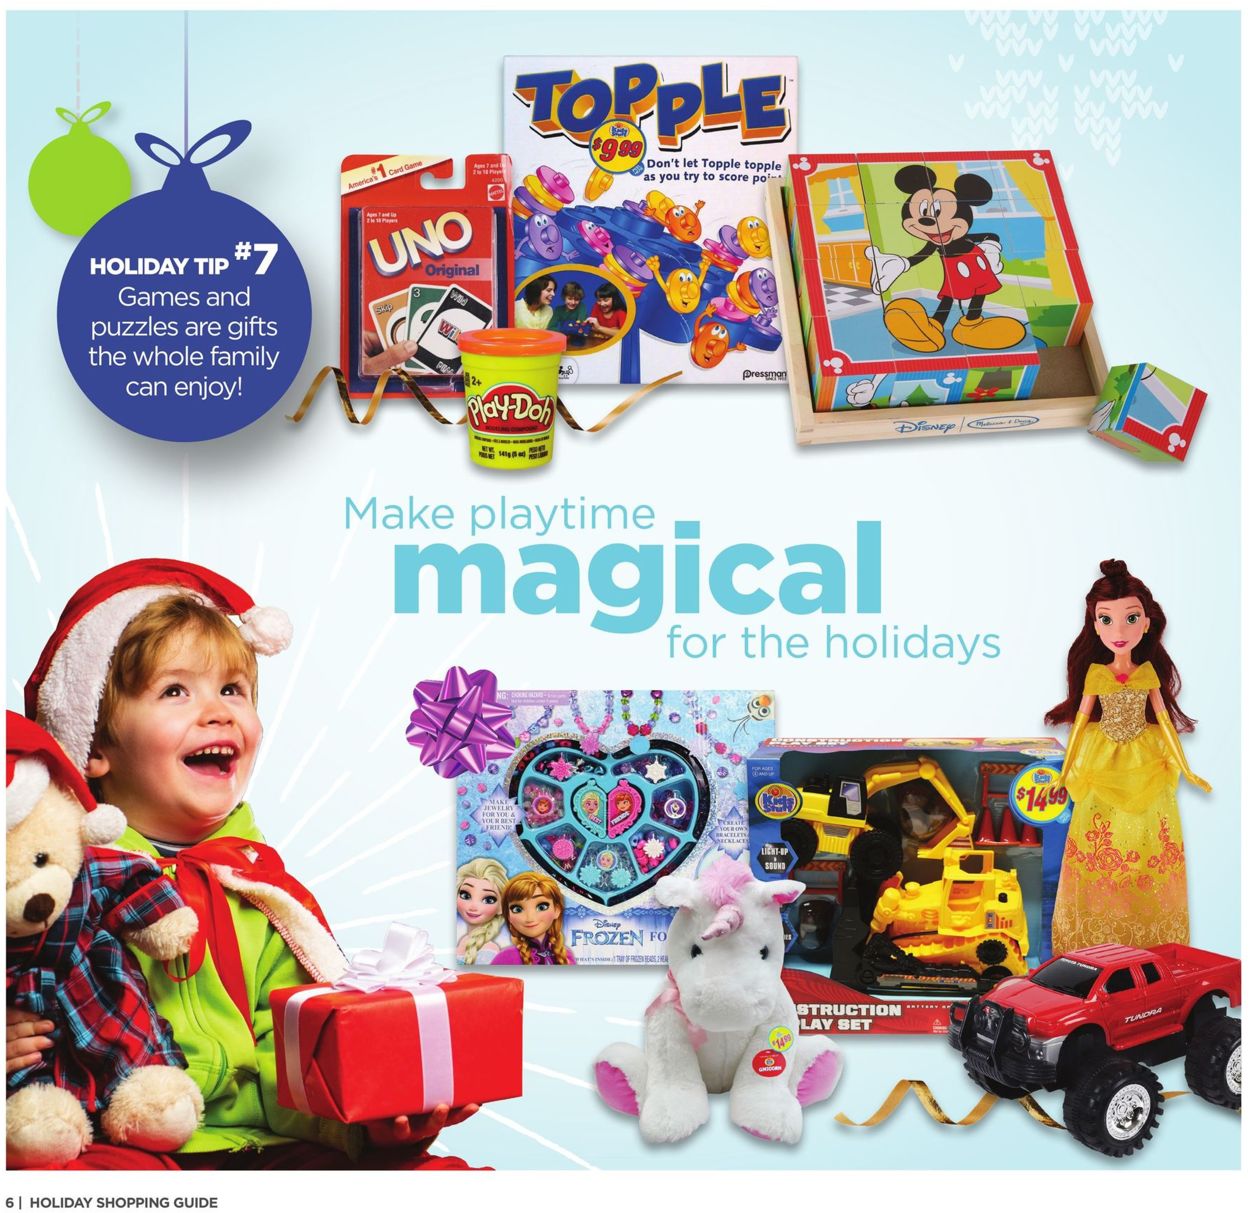 Rite Aid Ad from 12/08/2019